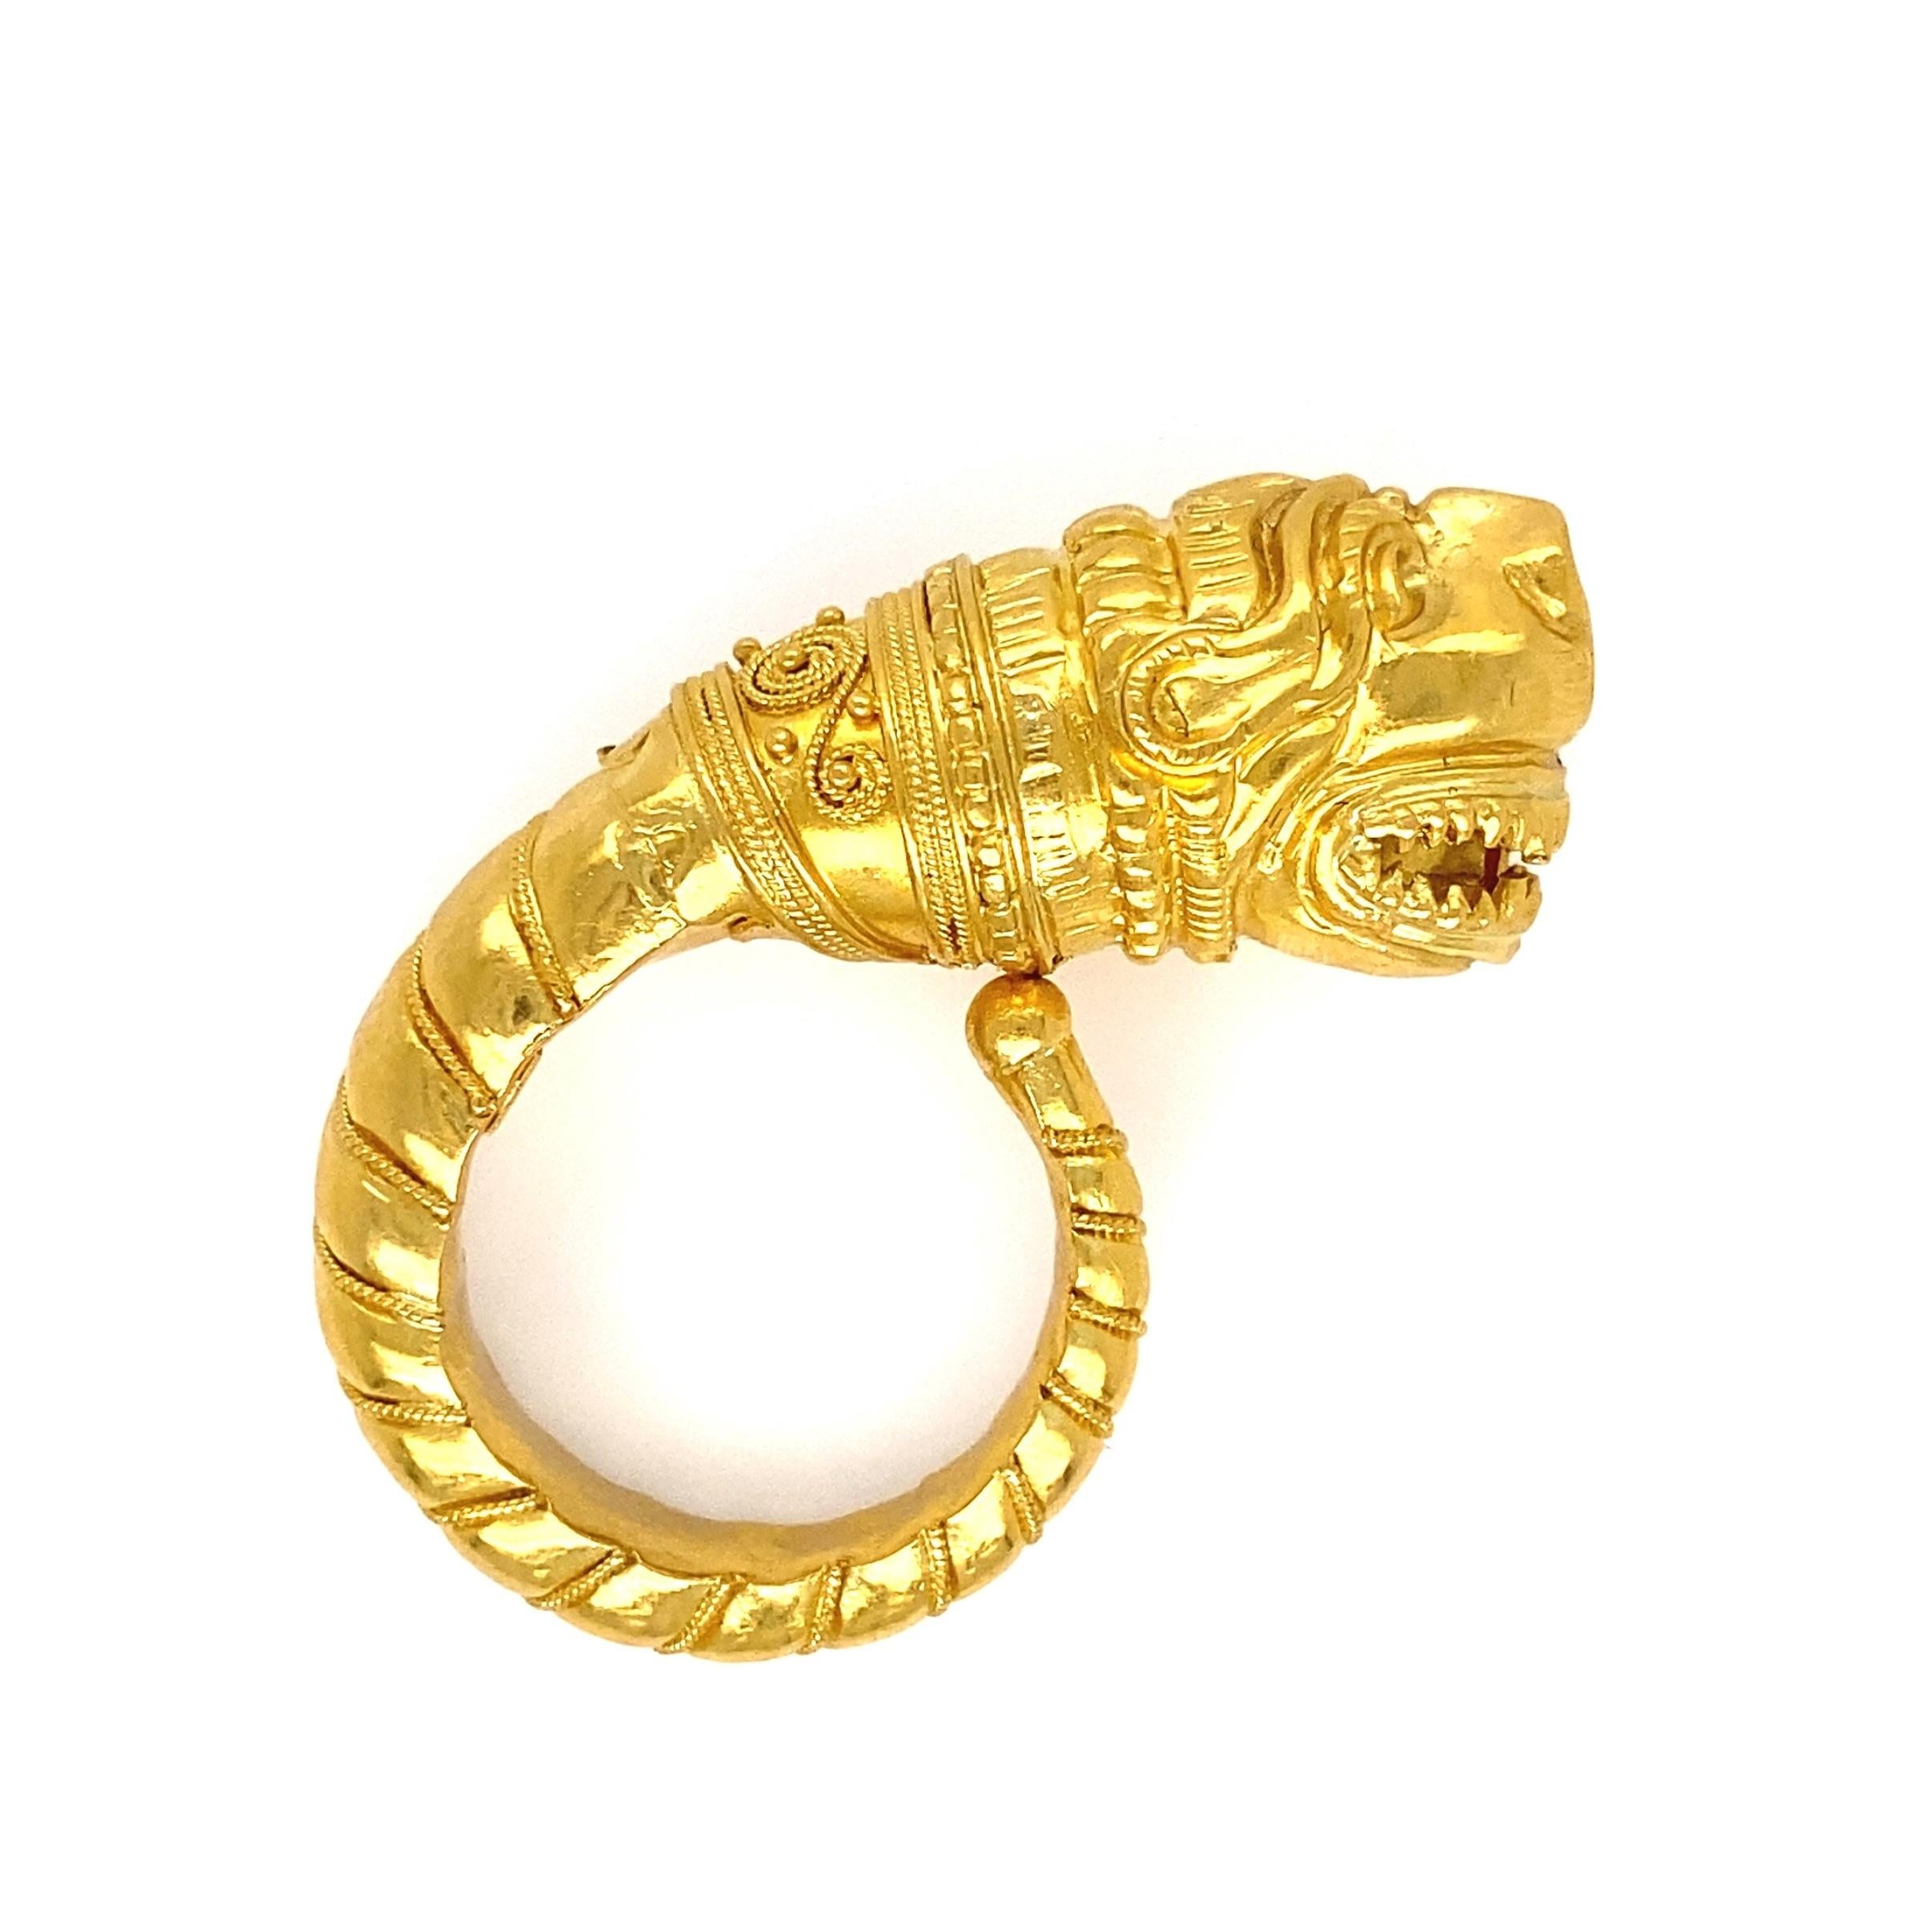 Simply Beautiful Lalaounis Iconic Ornate Dragon Gold Ring by Ilias Lalaounis. Hand crafted in 18K and 22K yellow Gold. Dimensions: 1.47”w x 0.45”h x 1.07”d. Ring size 5.5. Marked. Approx. weight 9.10 grams. Classic and Chic…The perfect accessory for